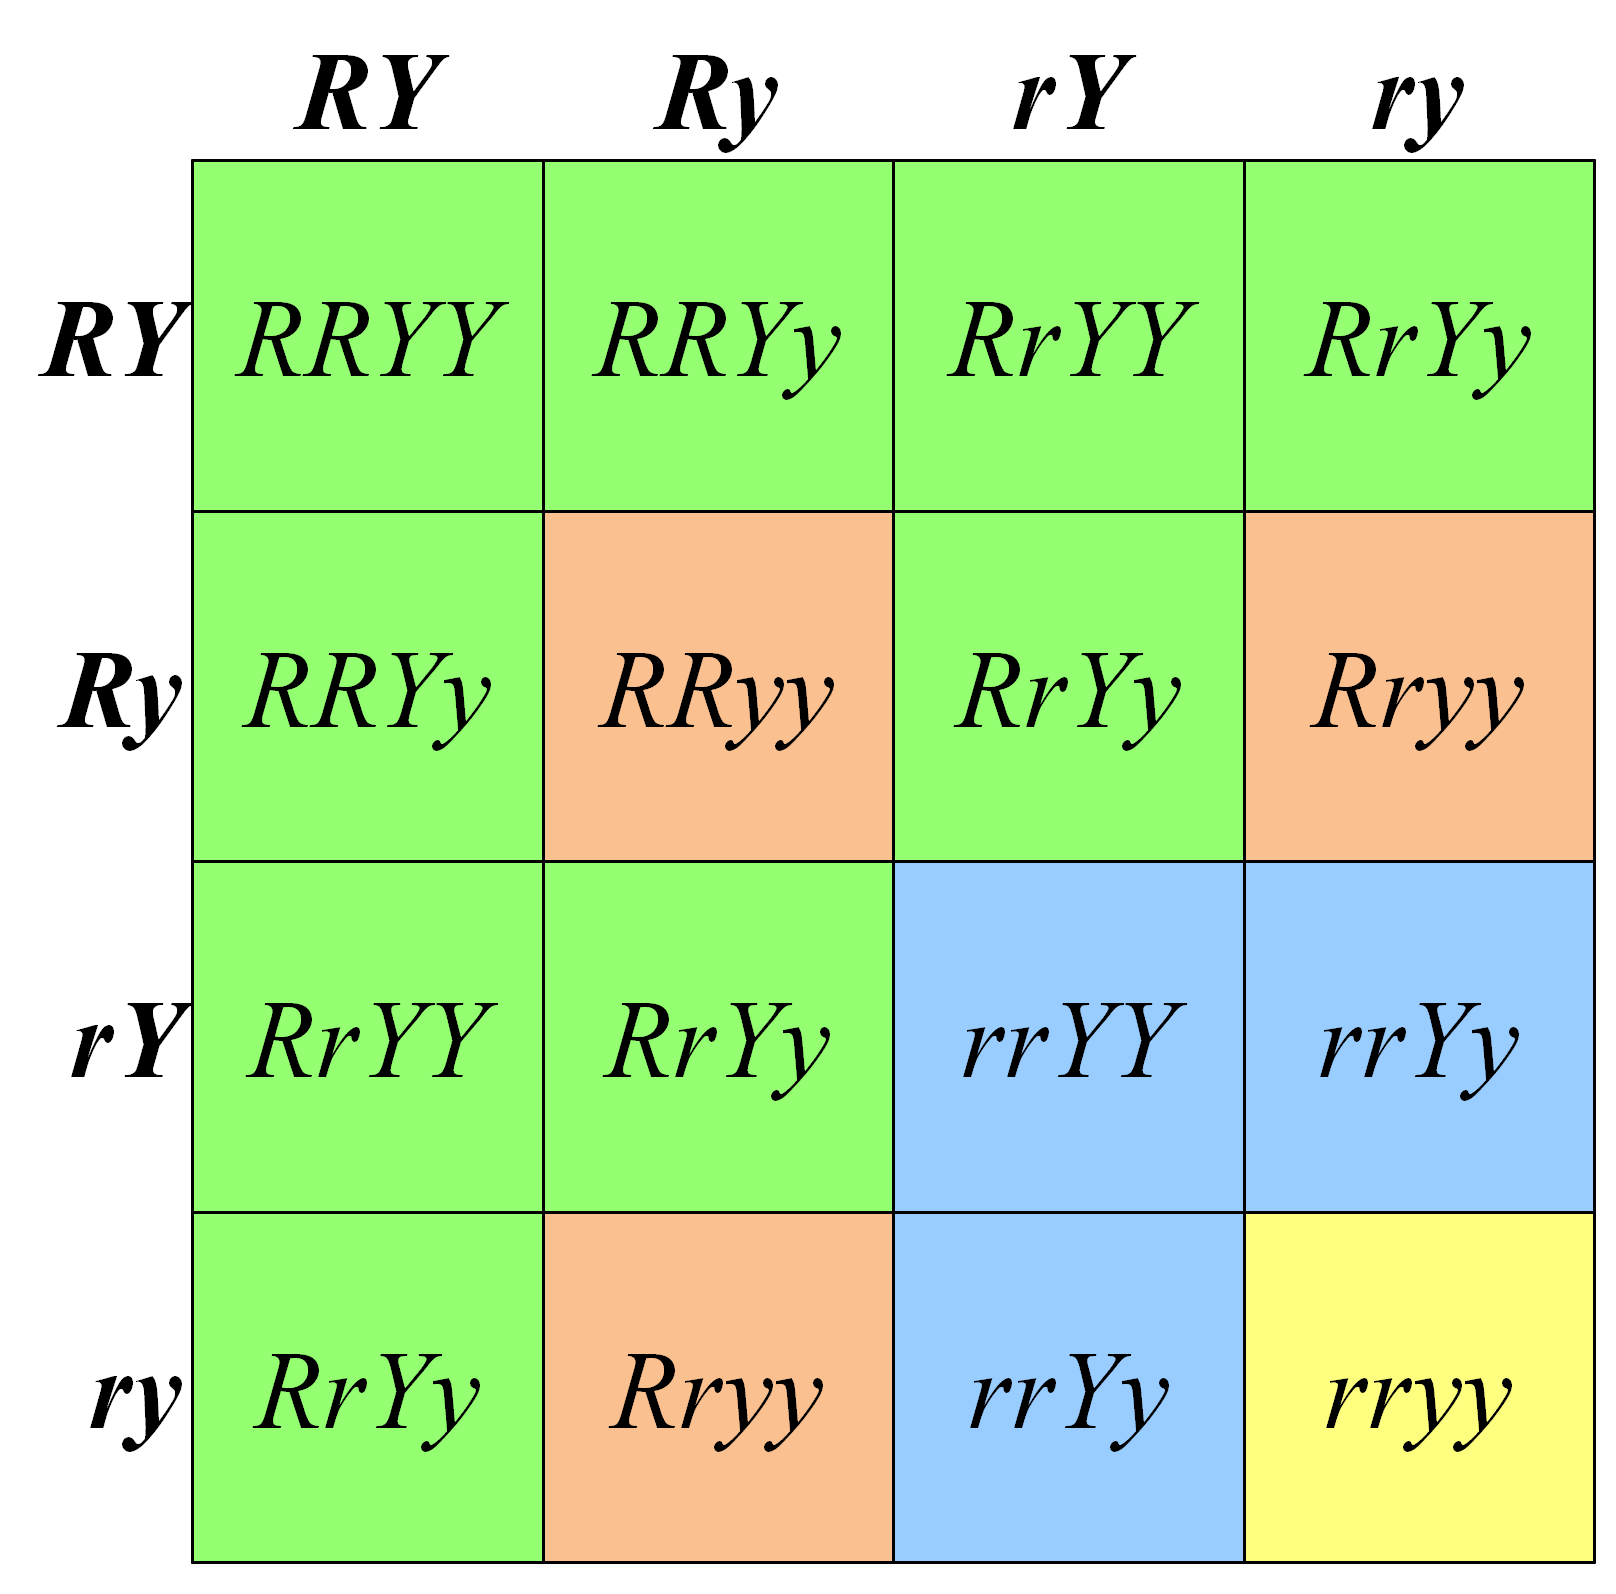 Dihybrid Punnett Square Heterozygous The Punnets Square Shows A Text Cross Of Mice That Are